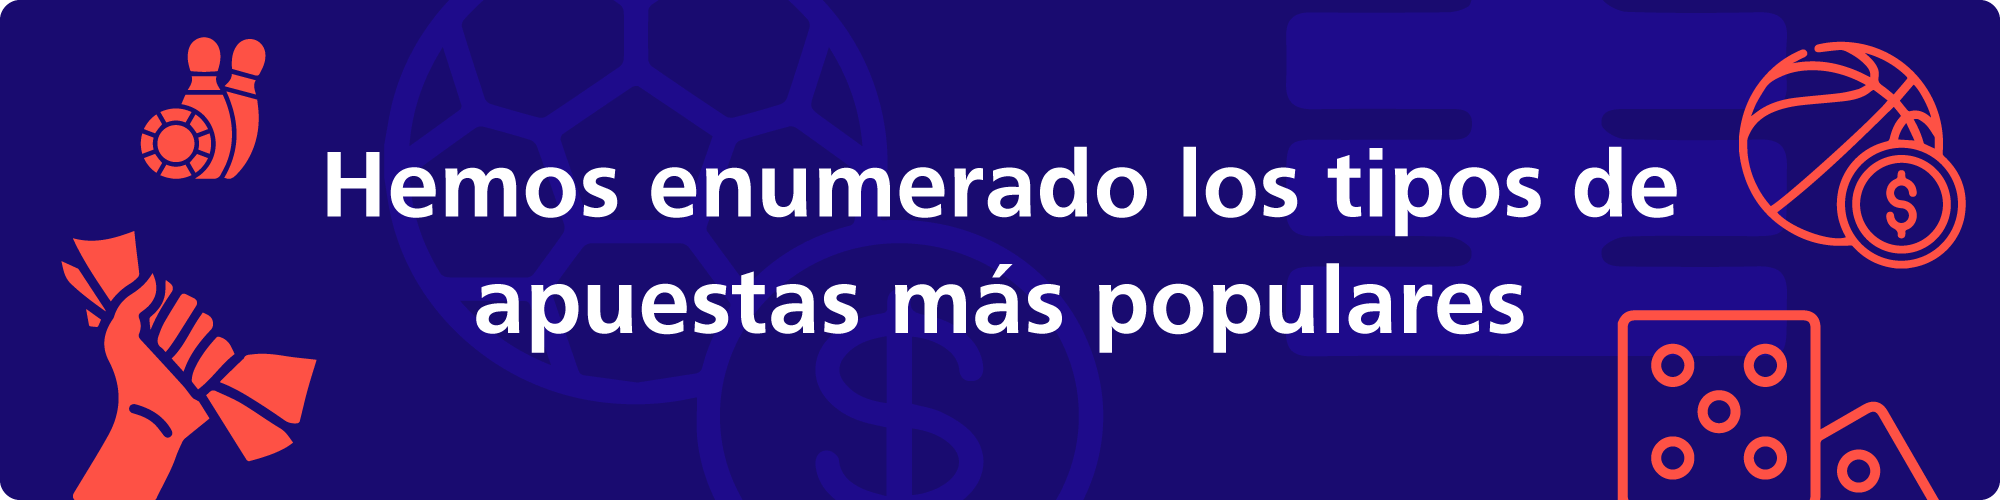 Bets mas populares